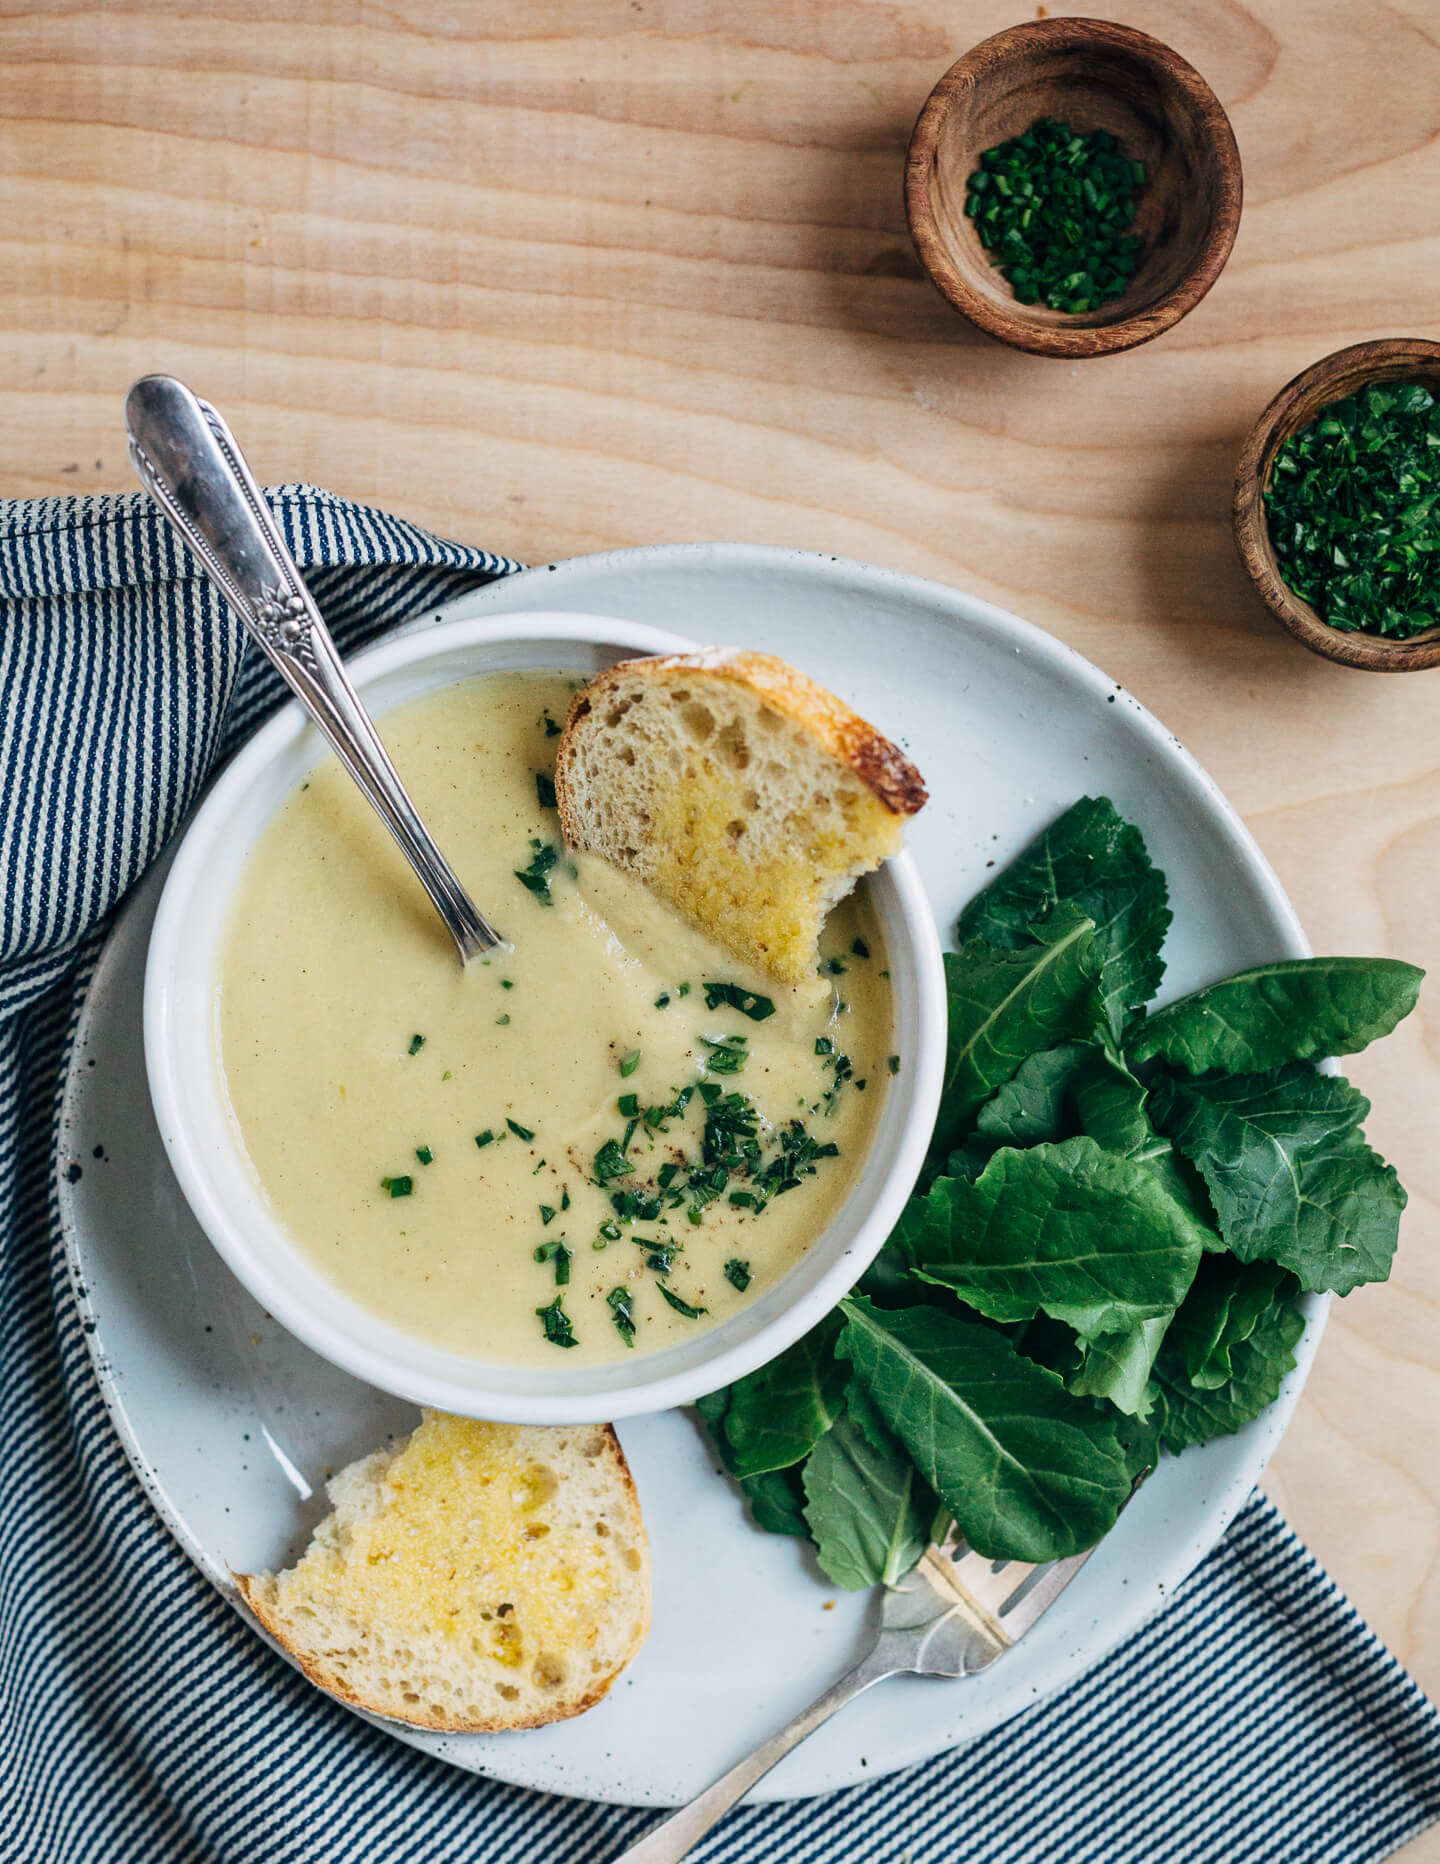 A simple leek and turnip soup for chilly nights. Made with leeks and turnips sautéed in brown butter, this is a peppery, beautifully balanced 5-ingredient soup.